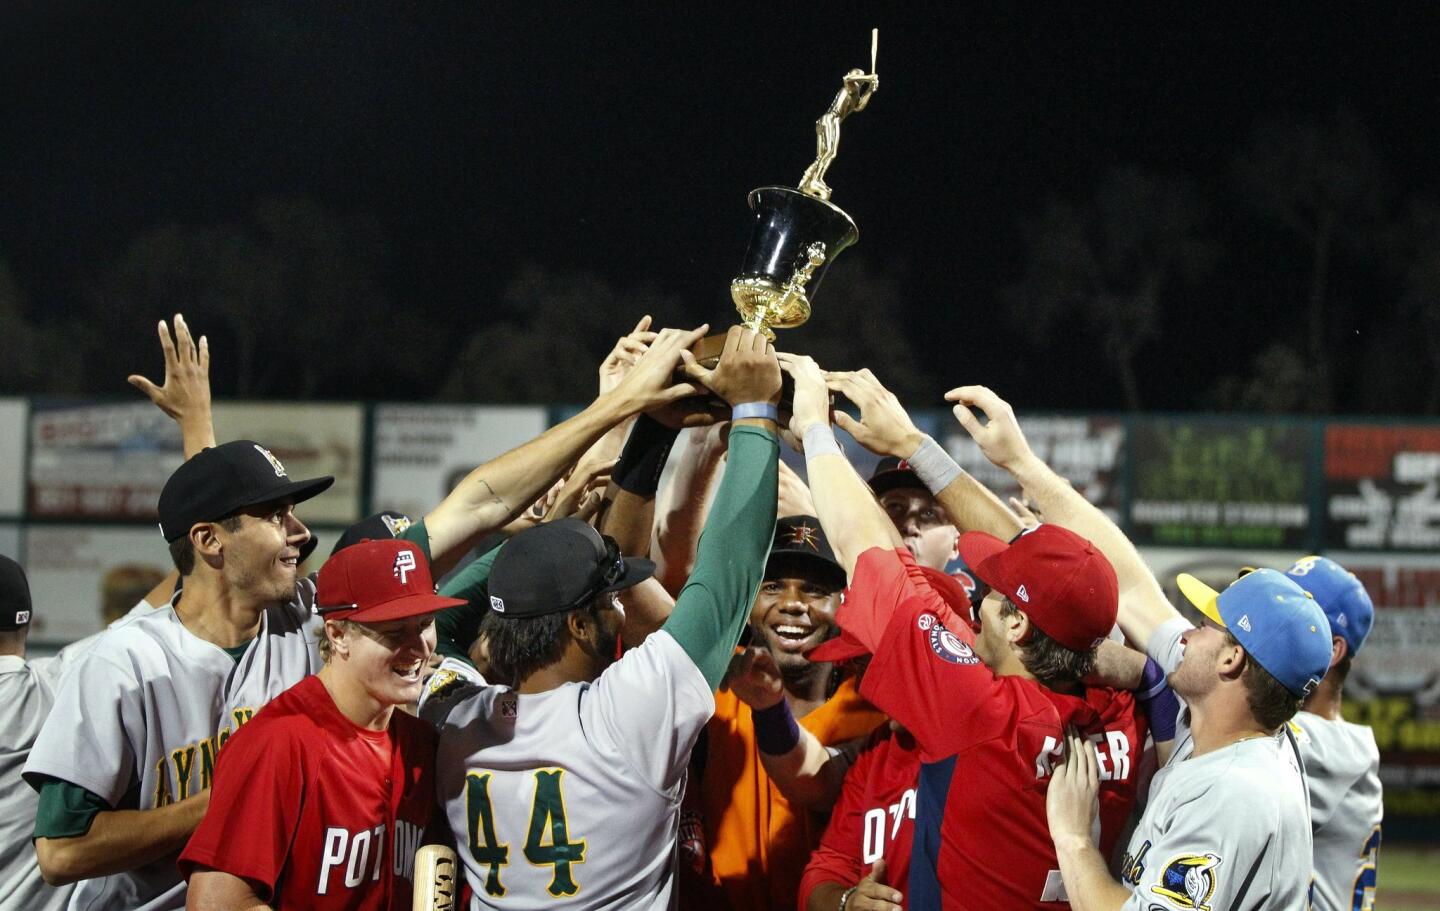 Carolina League players hold up the trophy after beating California 6-4 during the Carolina/California All-Star Game at The Diamond in Lake Elsinore on Tuesday.